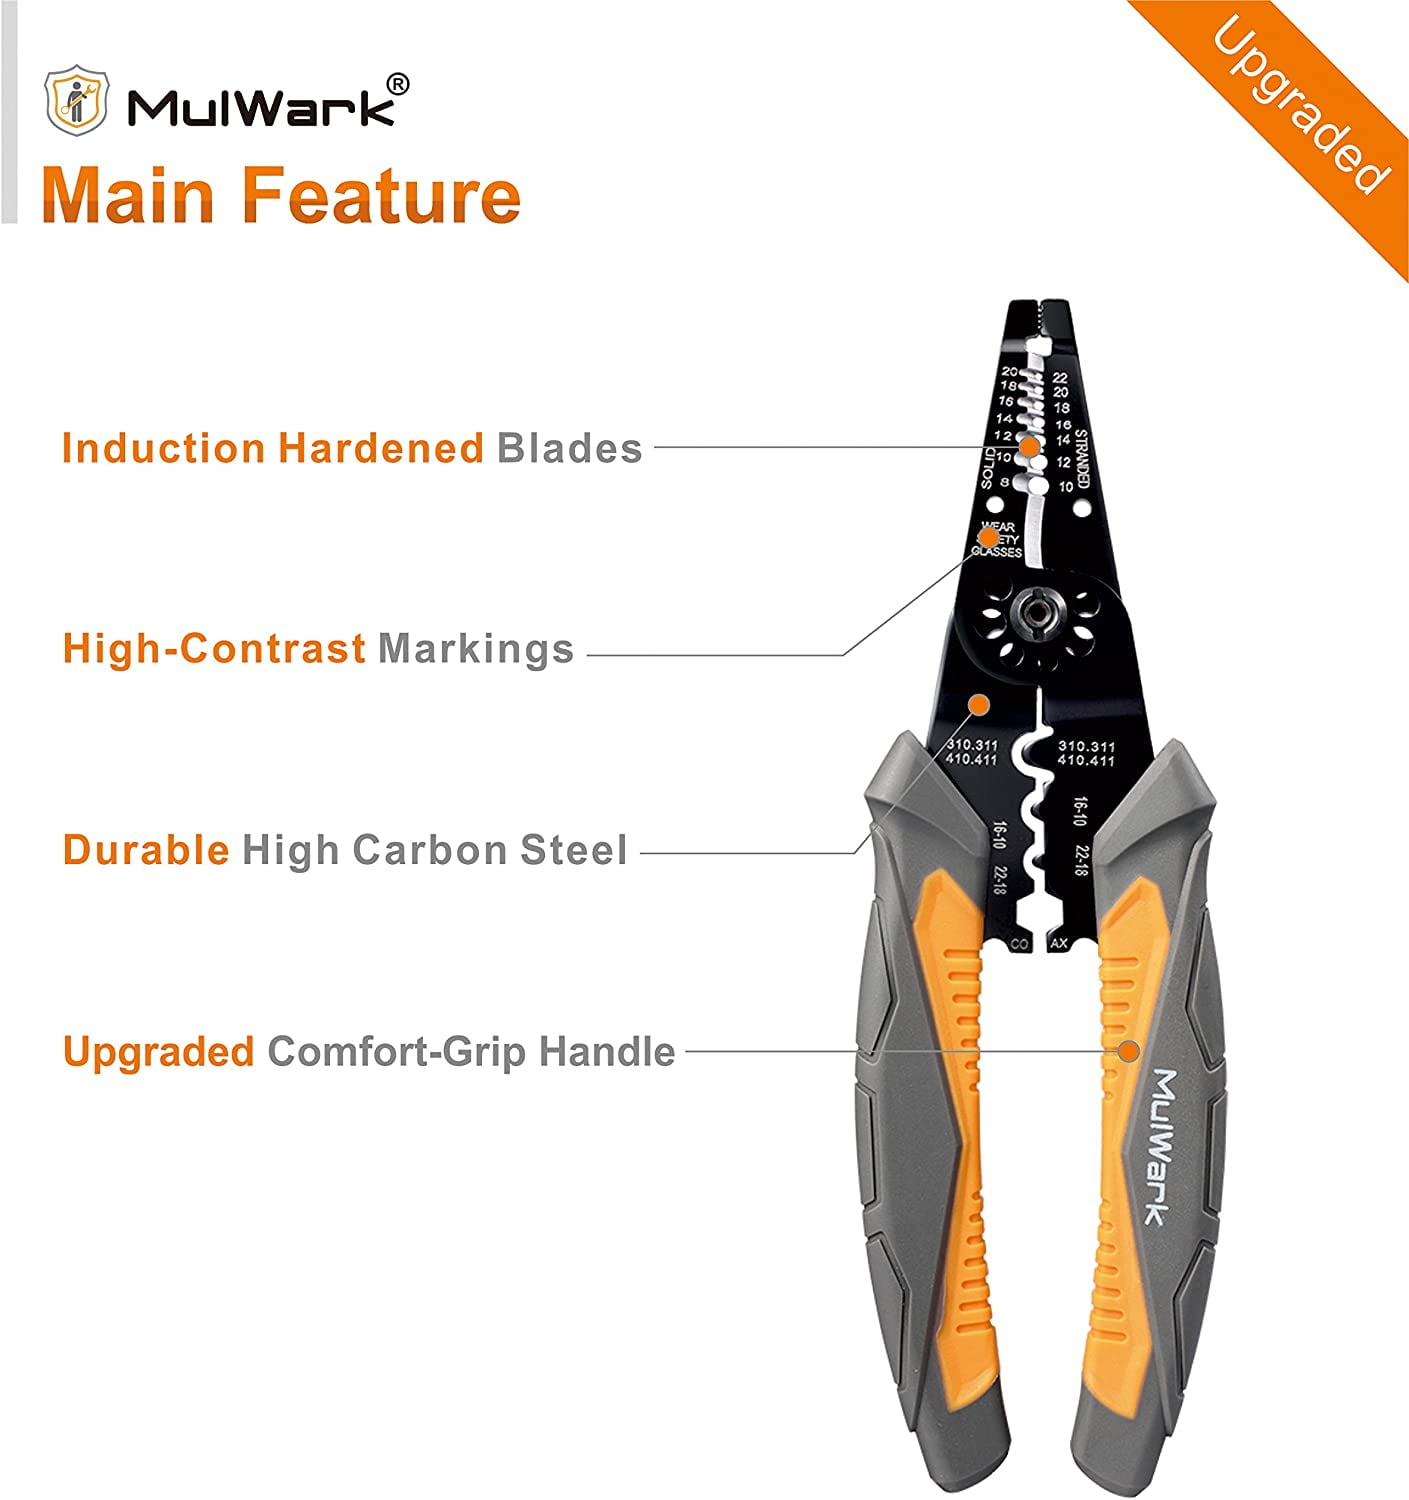 MulWark 8 Multi-Purpose Electrical Wire Stripping Tool Snips, Crimpers & Pliers